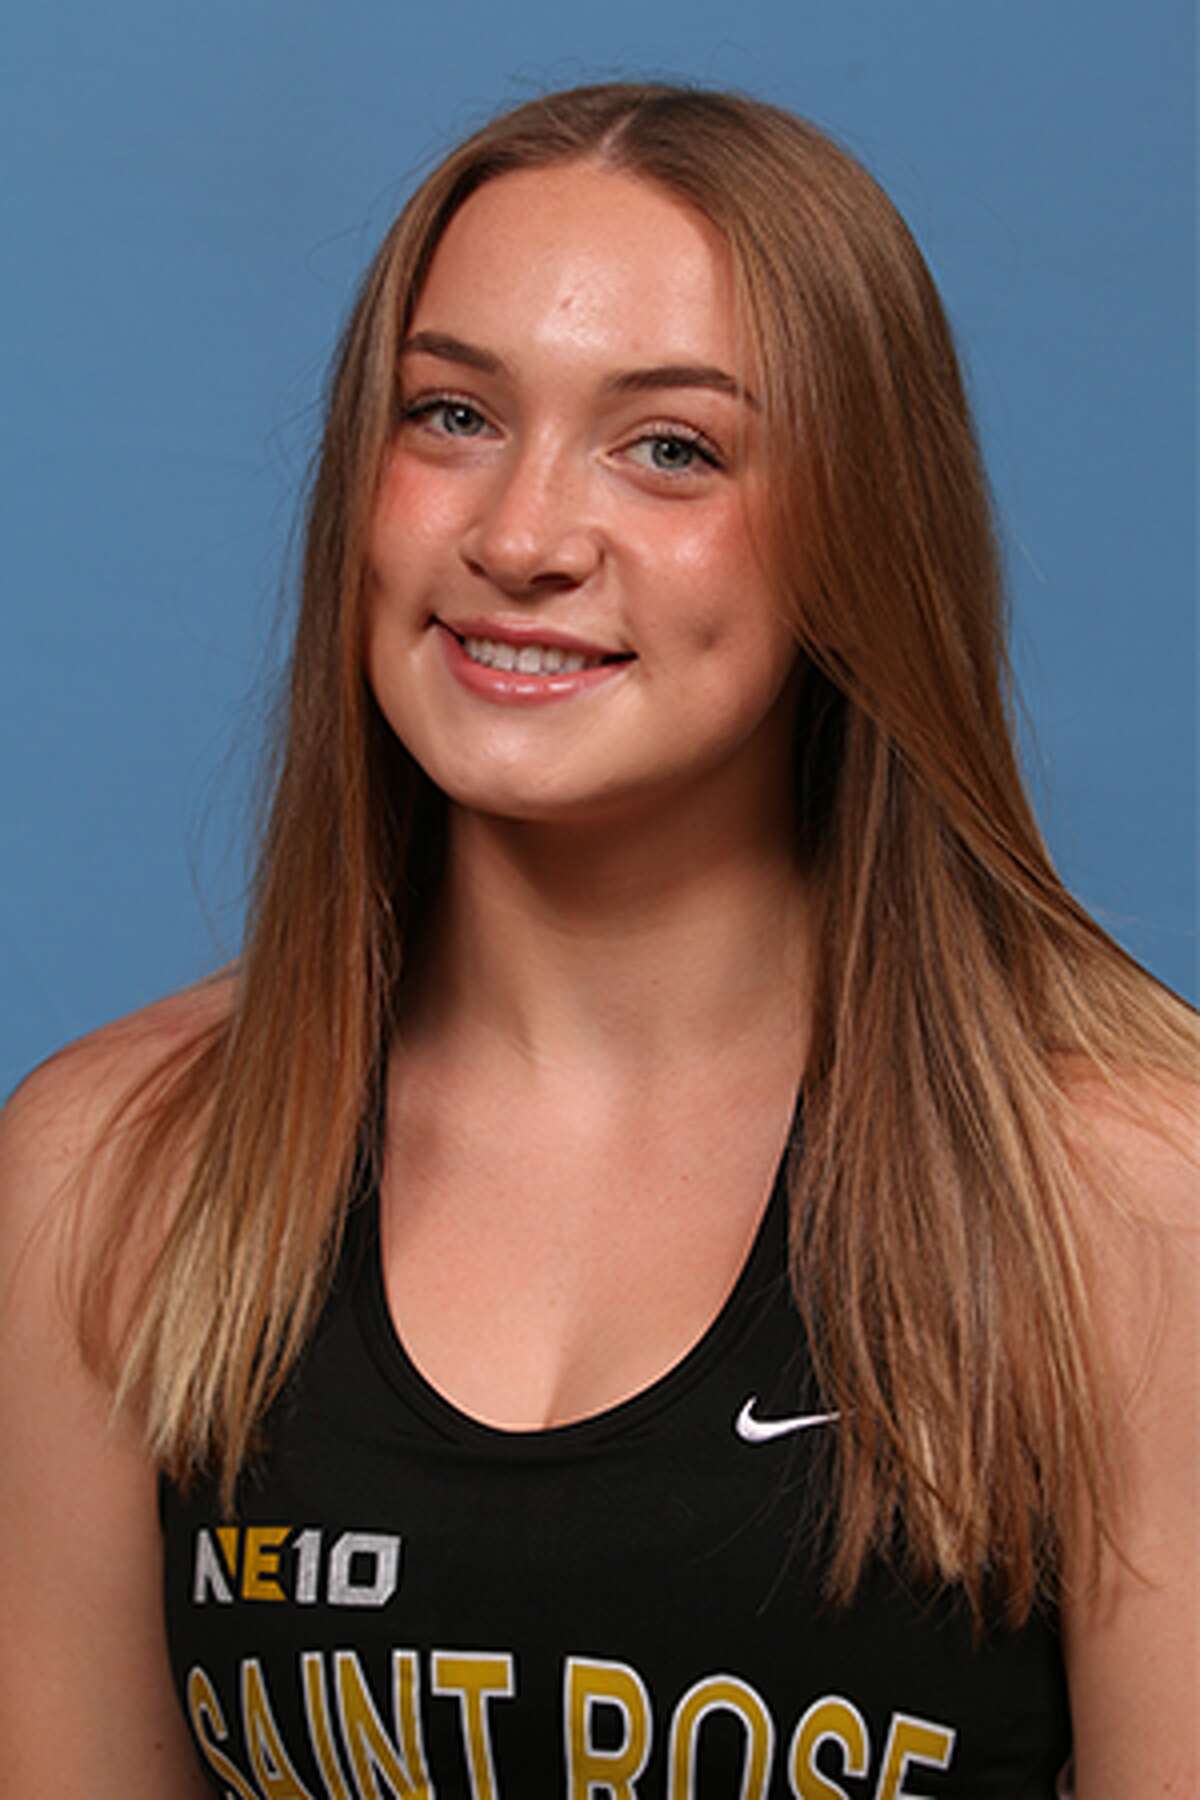 Hoosic Valley graduate Lauren Reed of the Saint Rose women's track and field team.